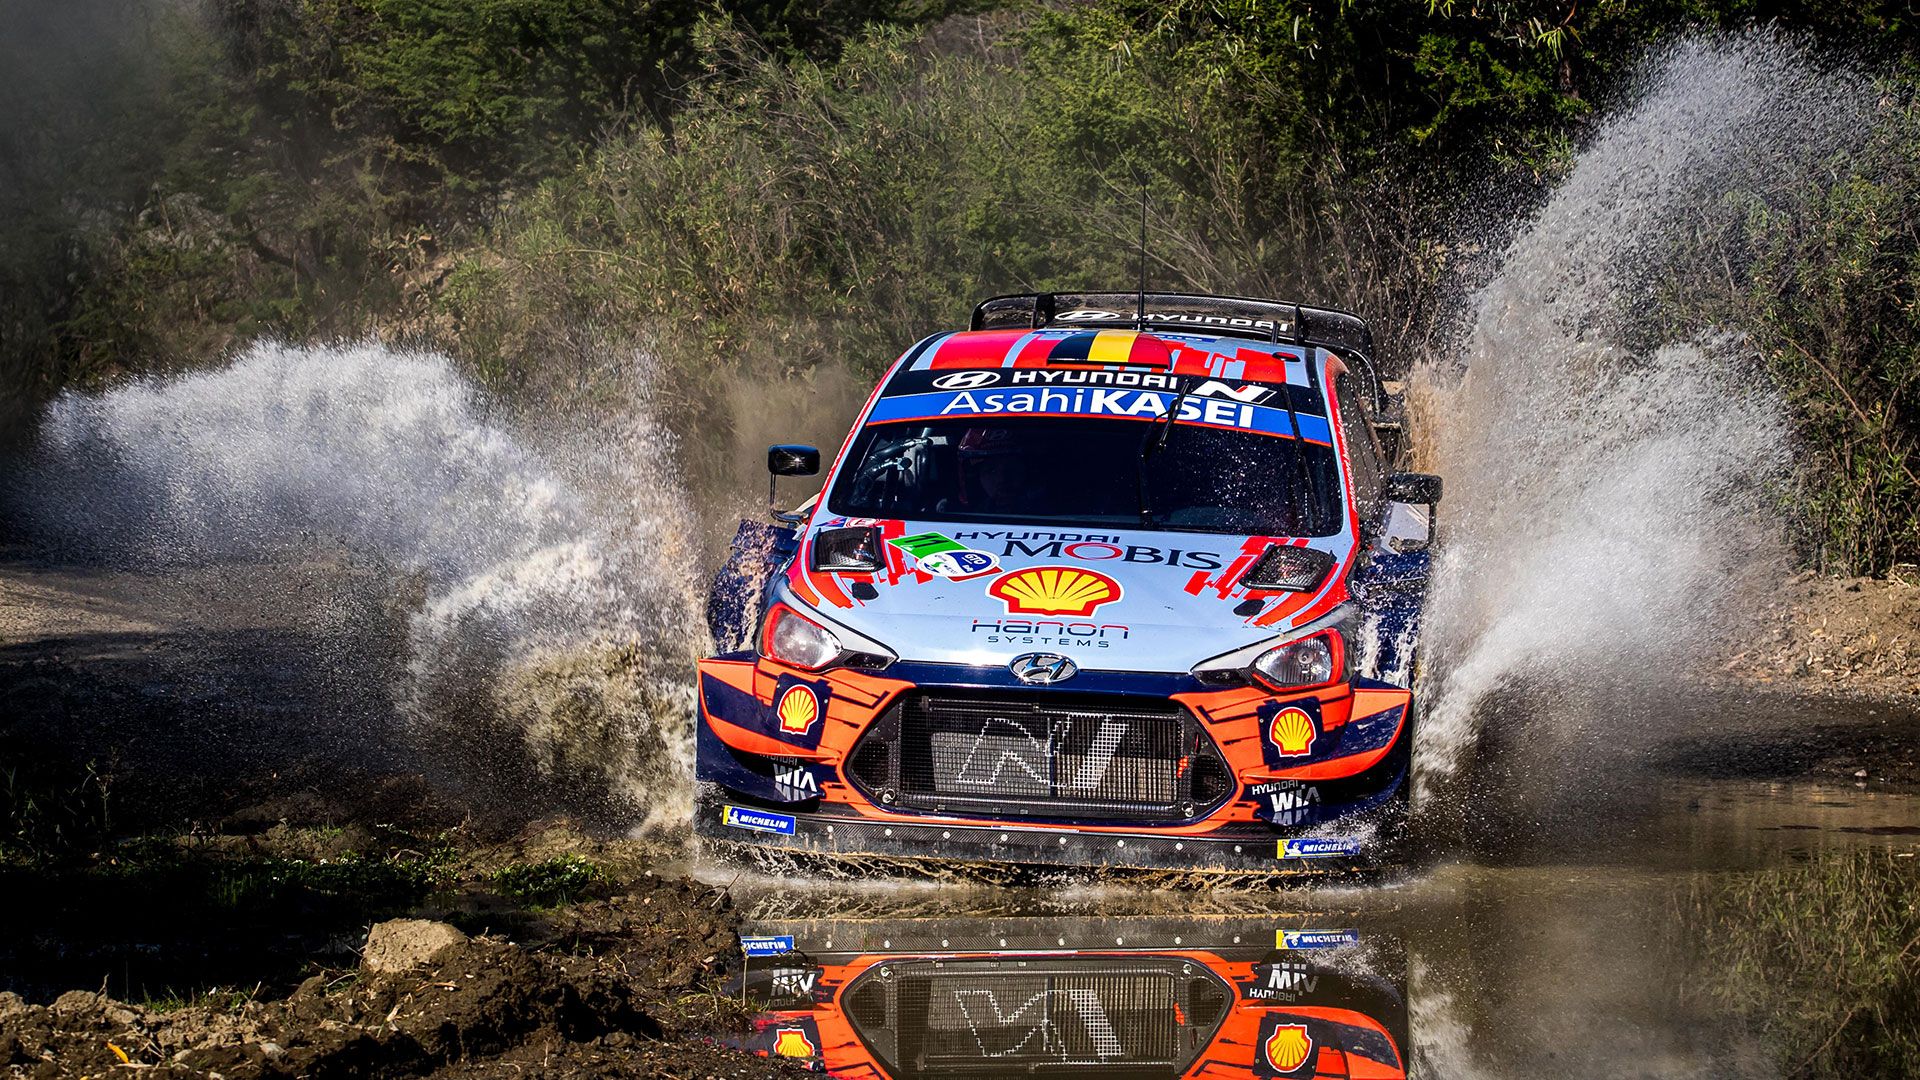 Moving on up in the WRC Rally Mexico